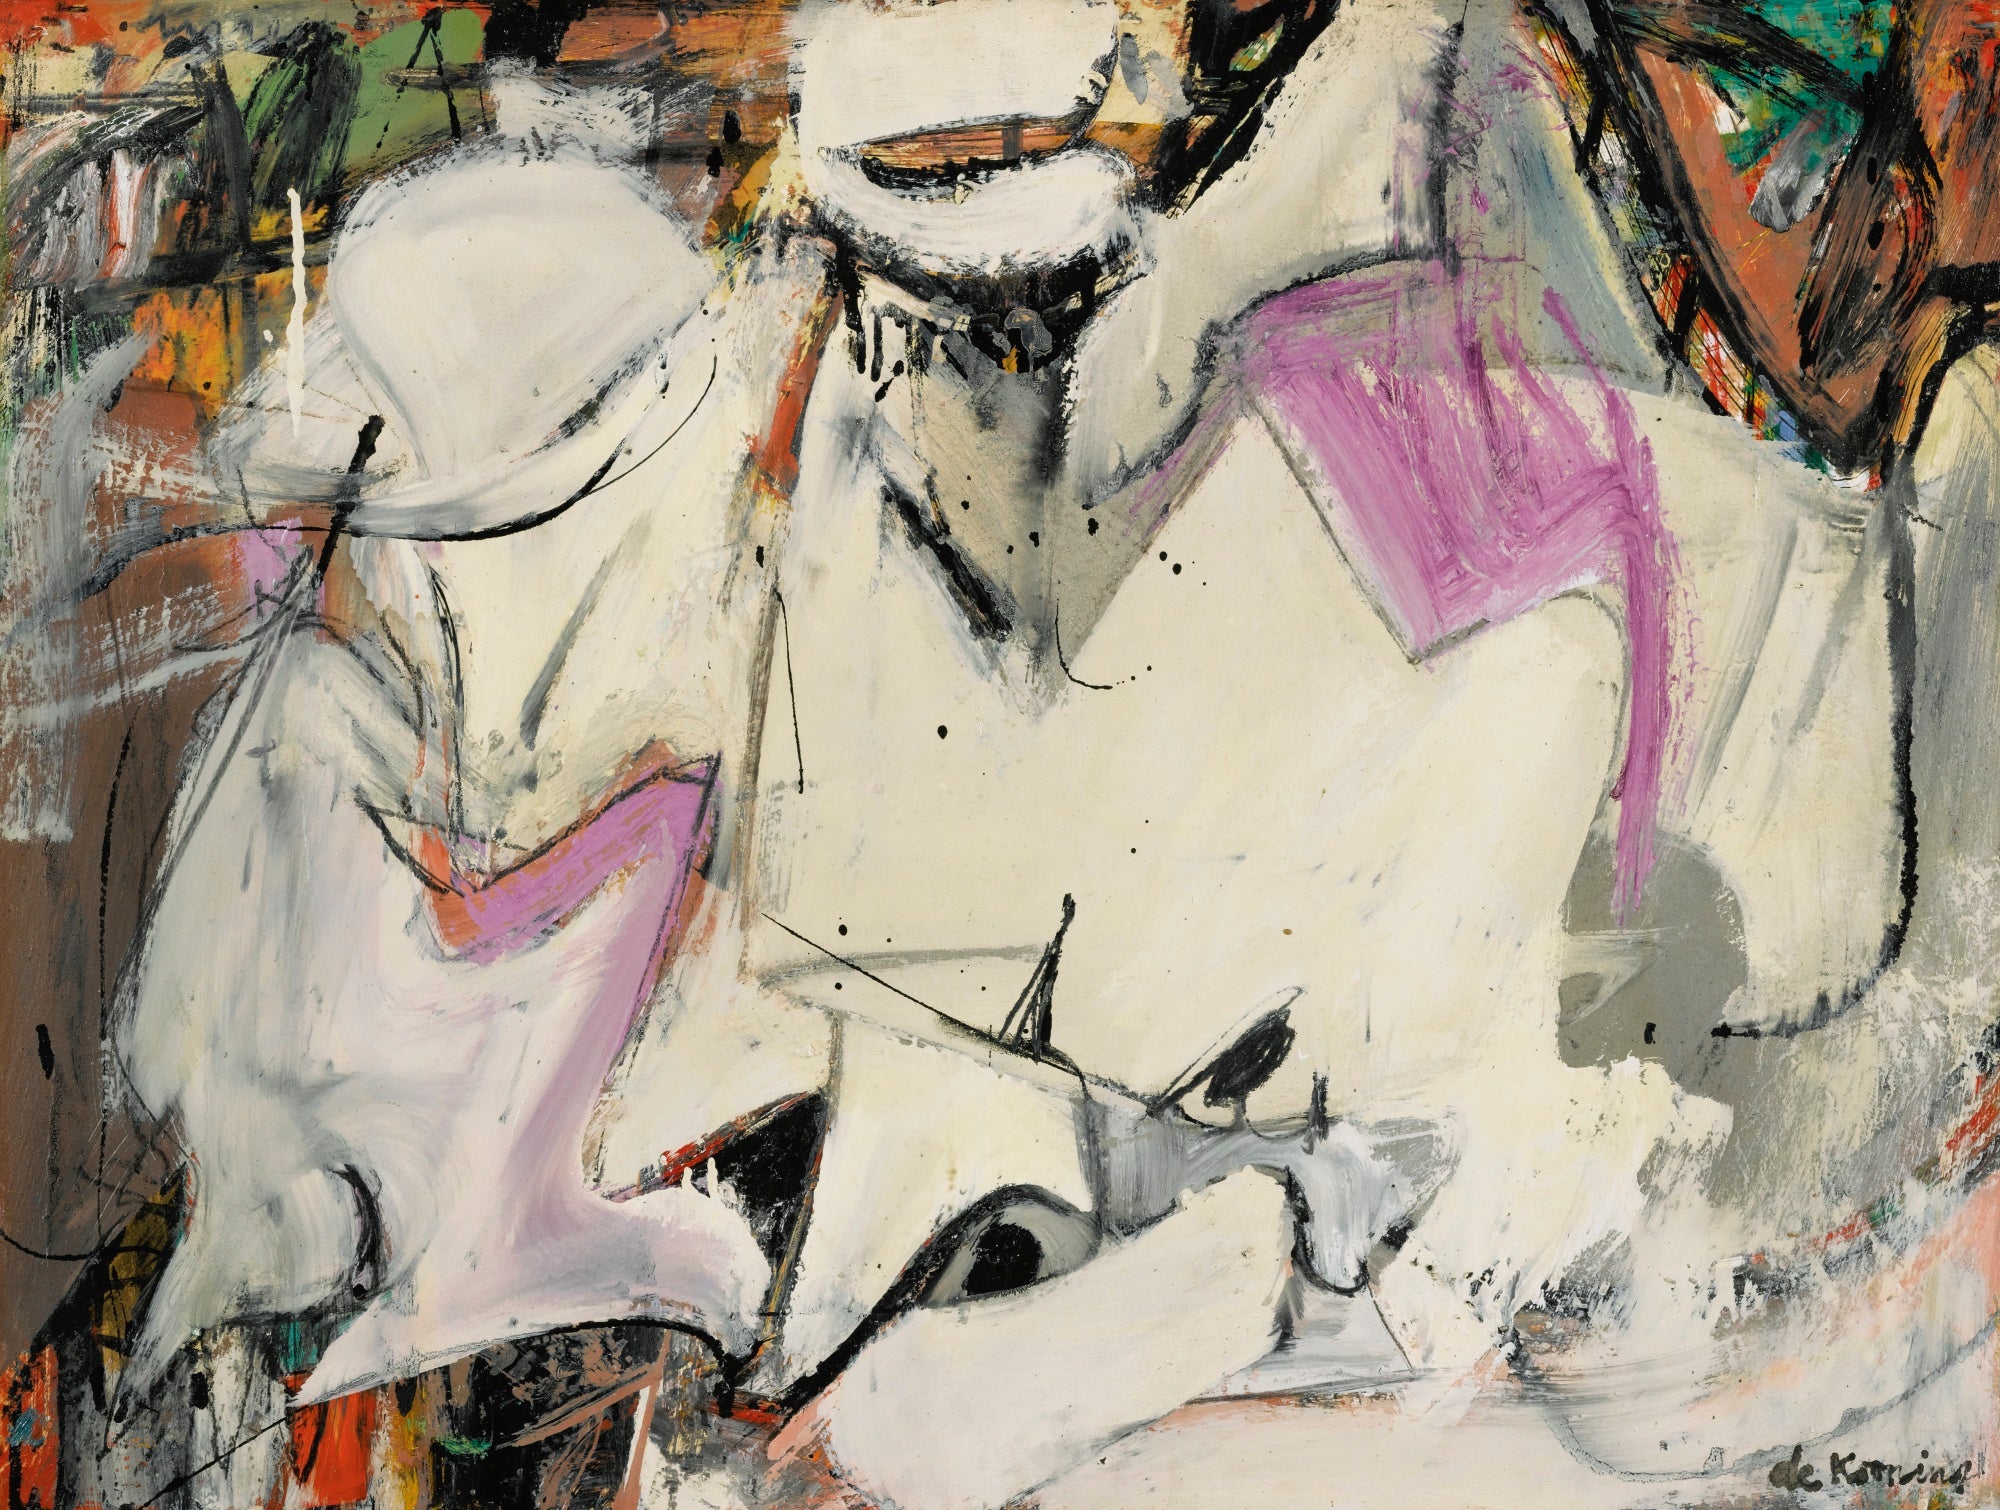 A Willem de Kooning which sold for million